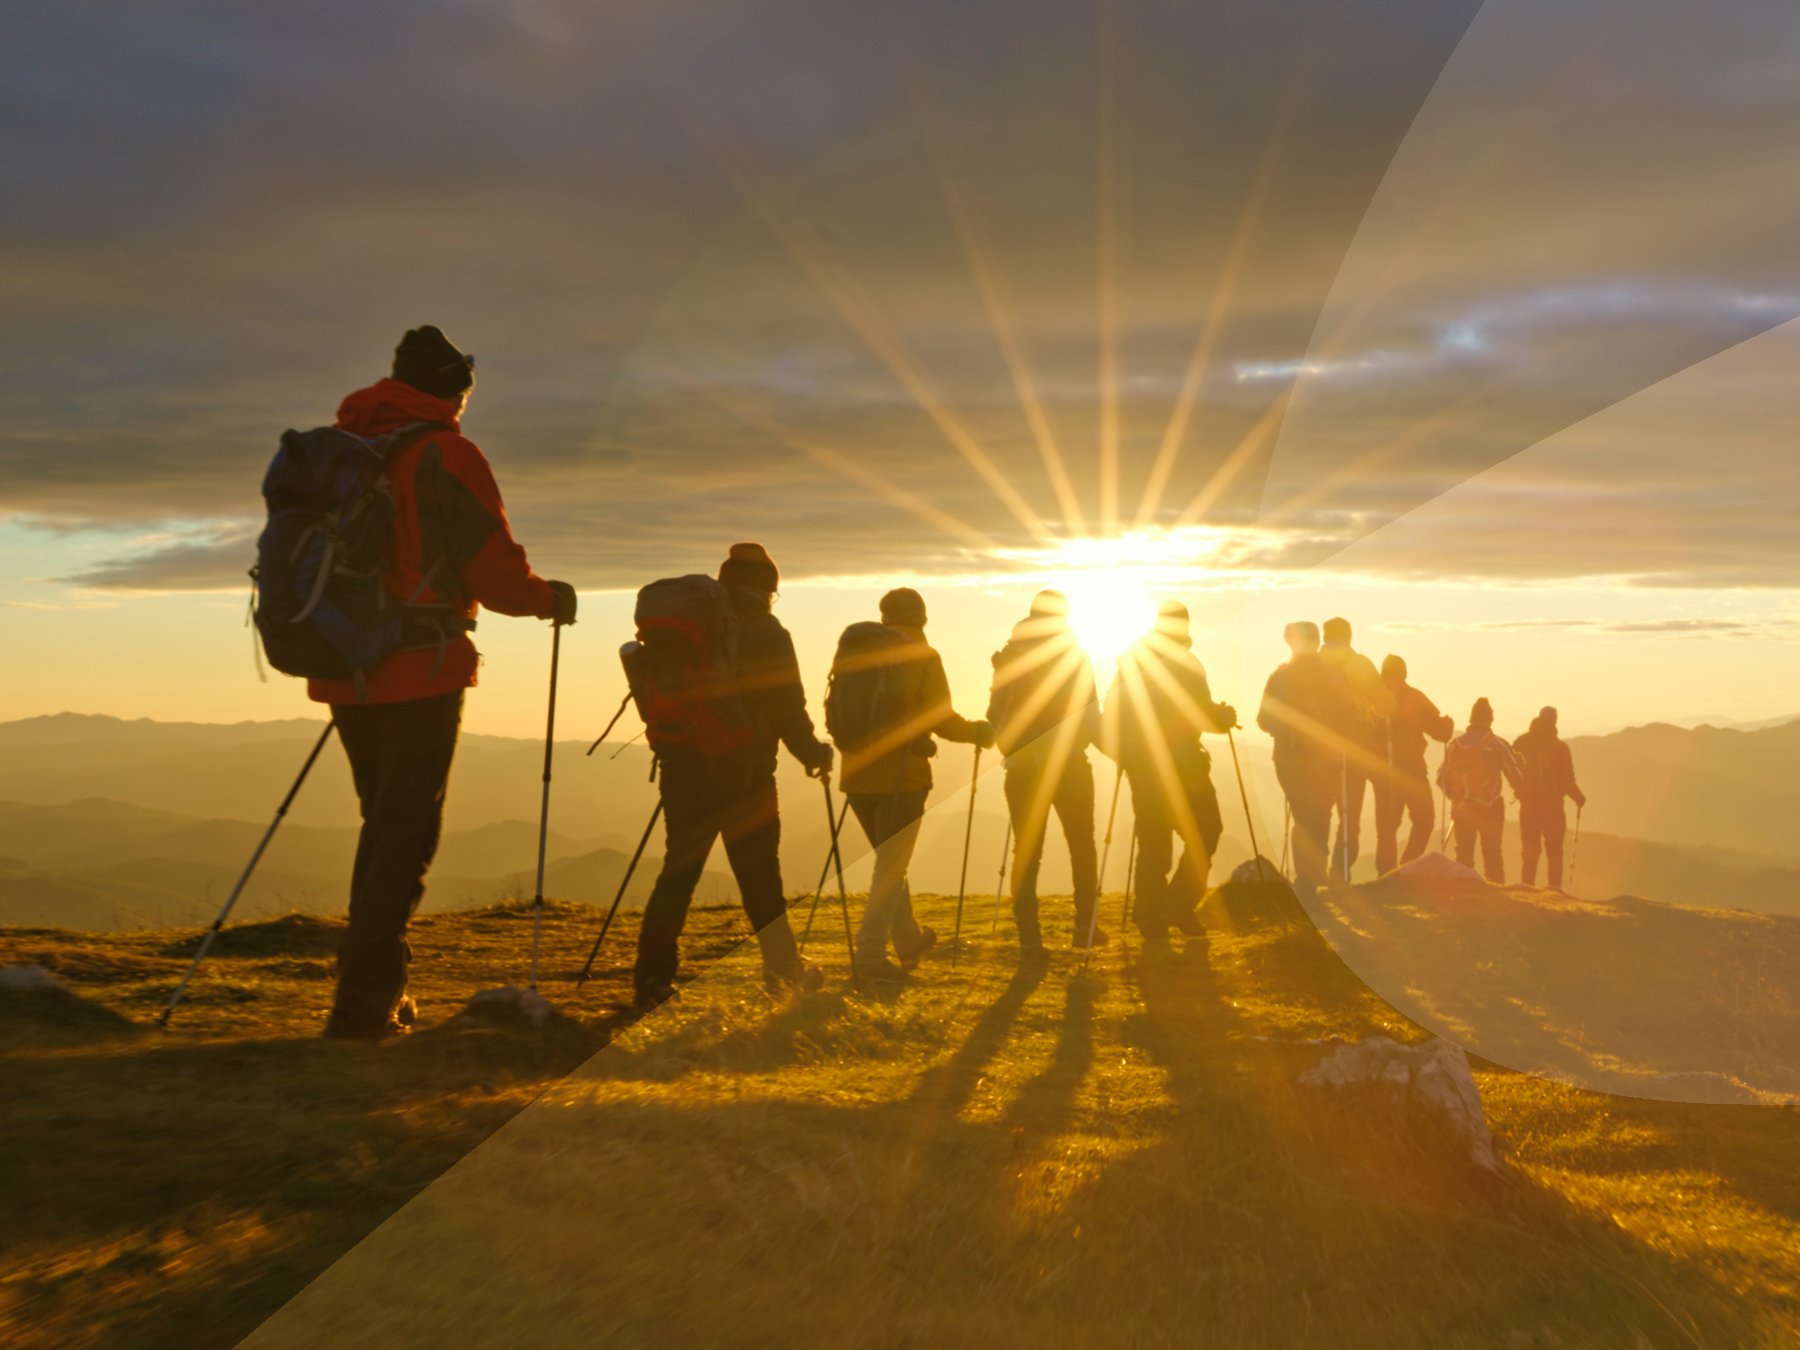 A group of people trekking in the mountains, walking towards the sunset.